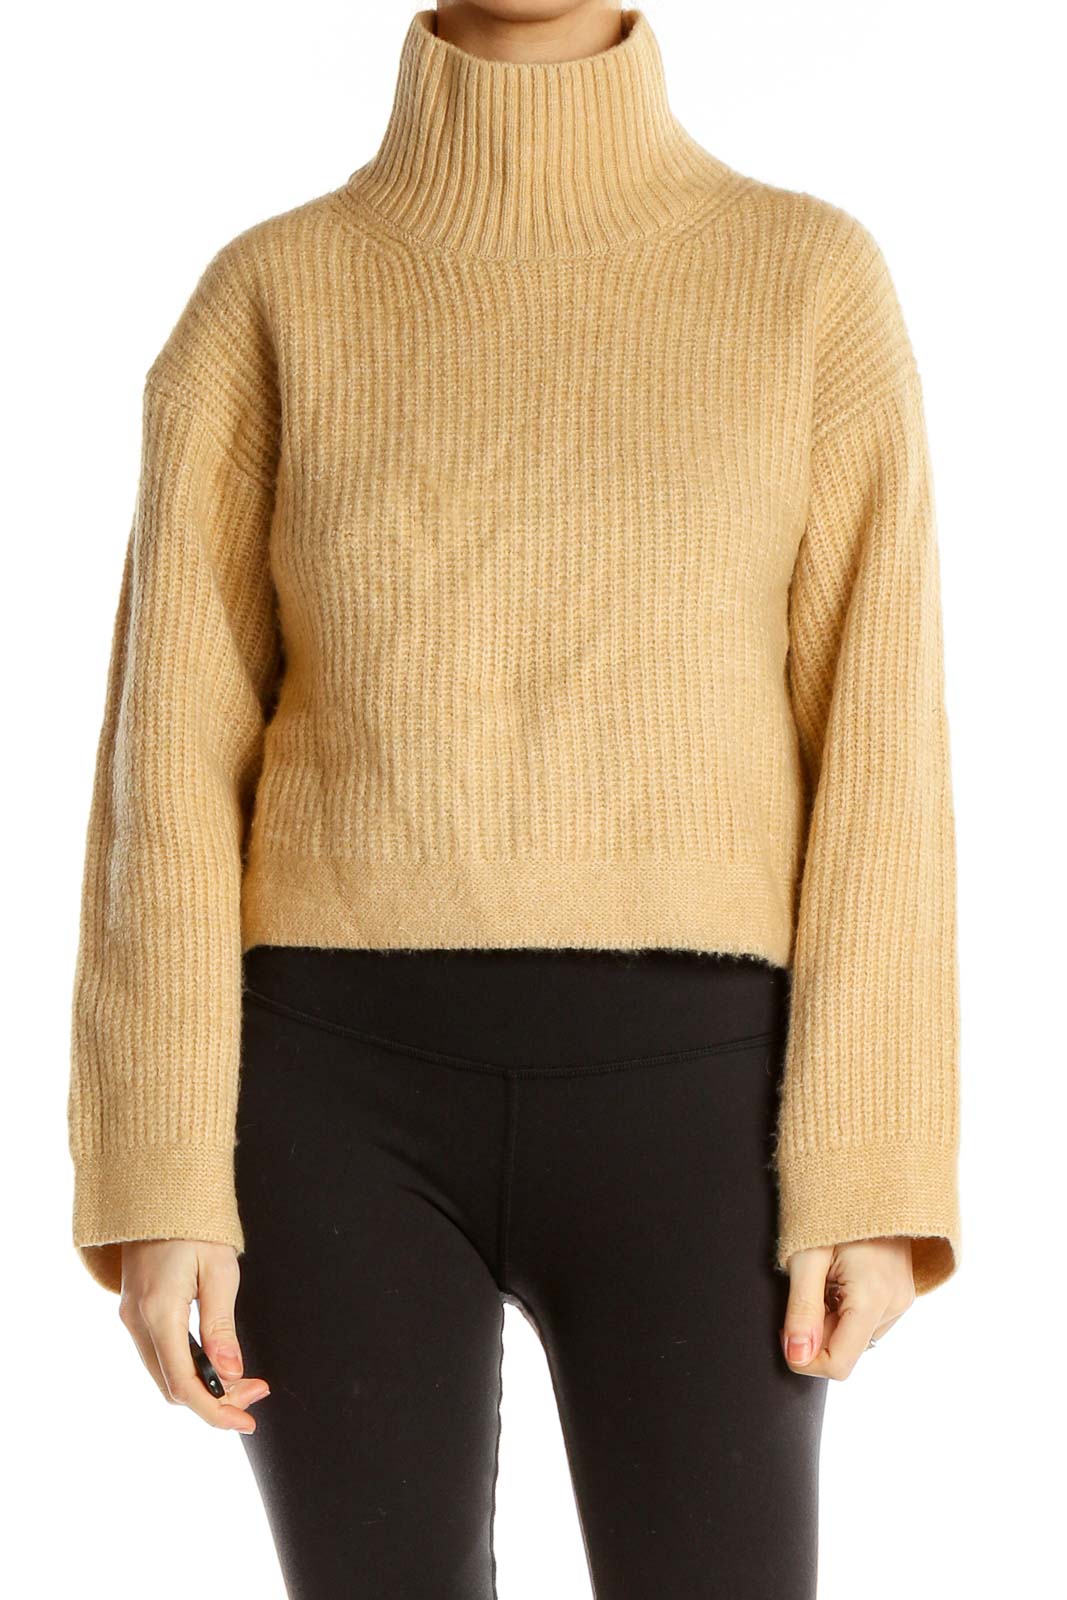 Beige Cropped Turtleneck Sweater Front